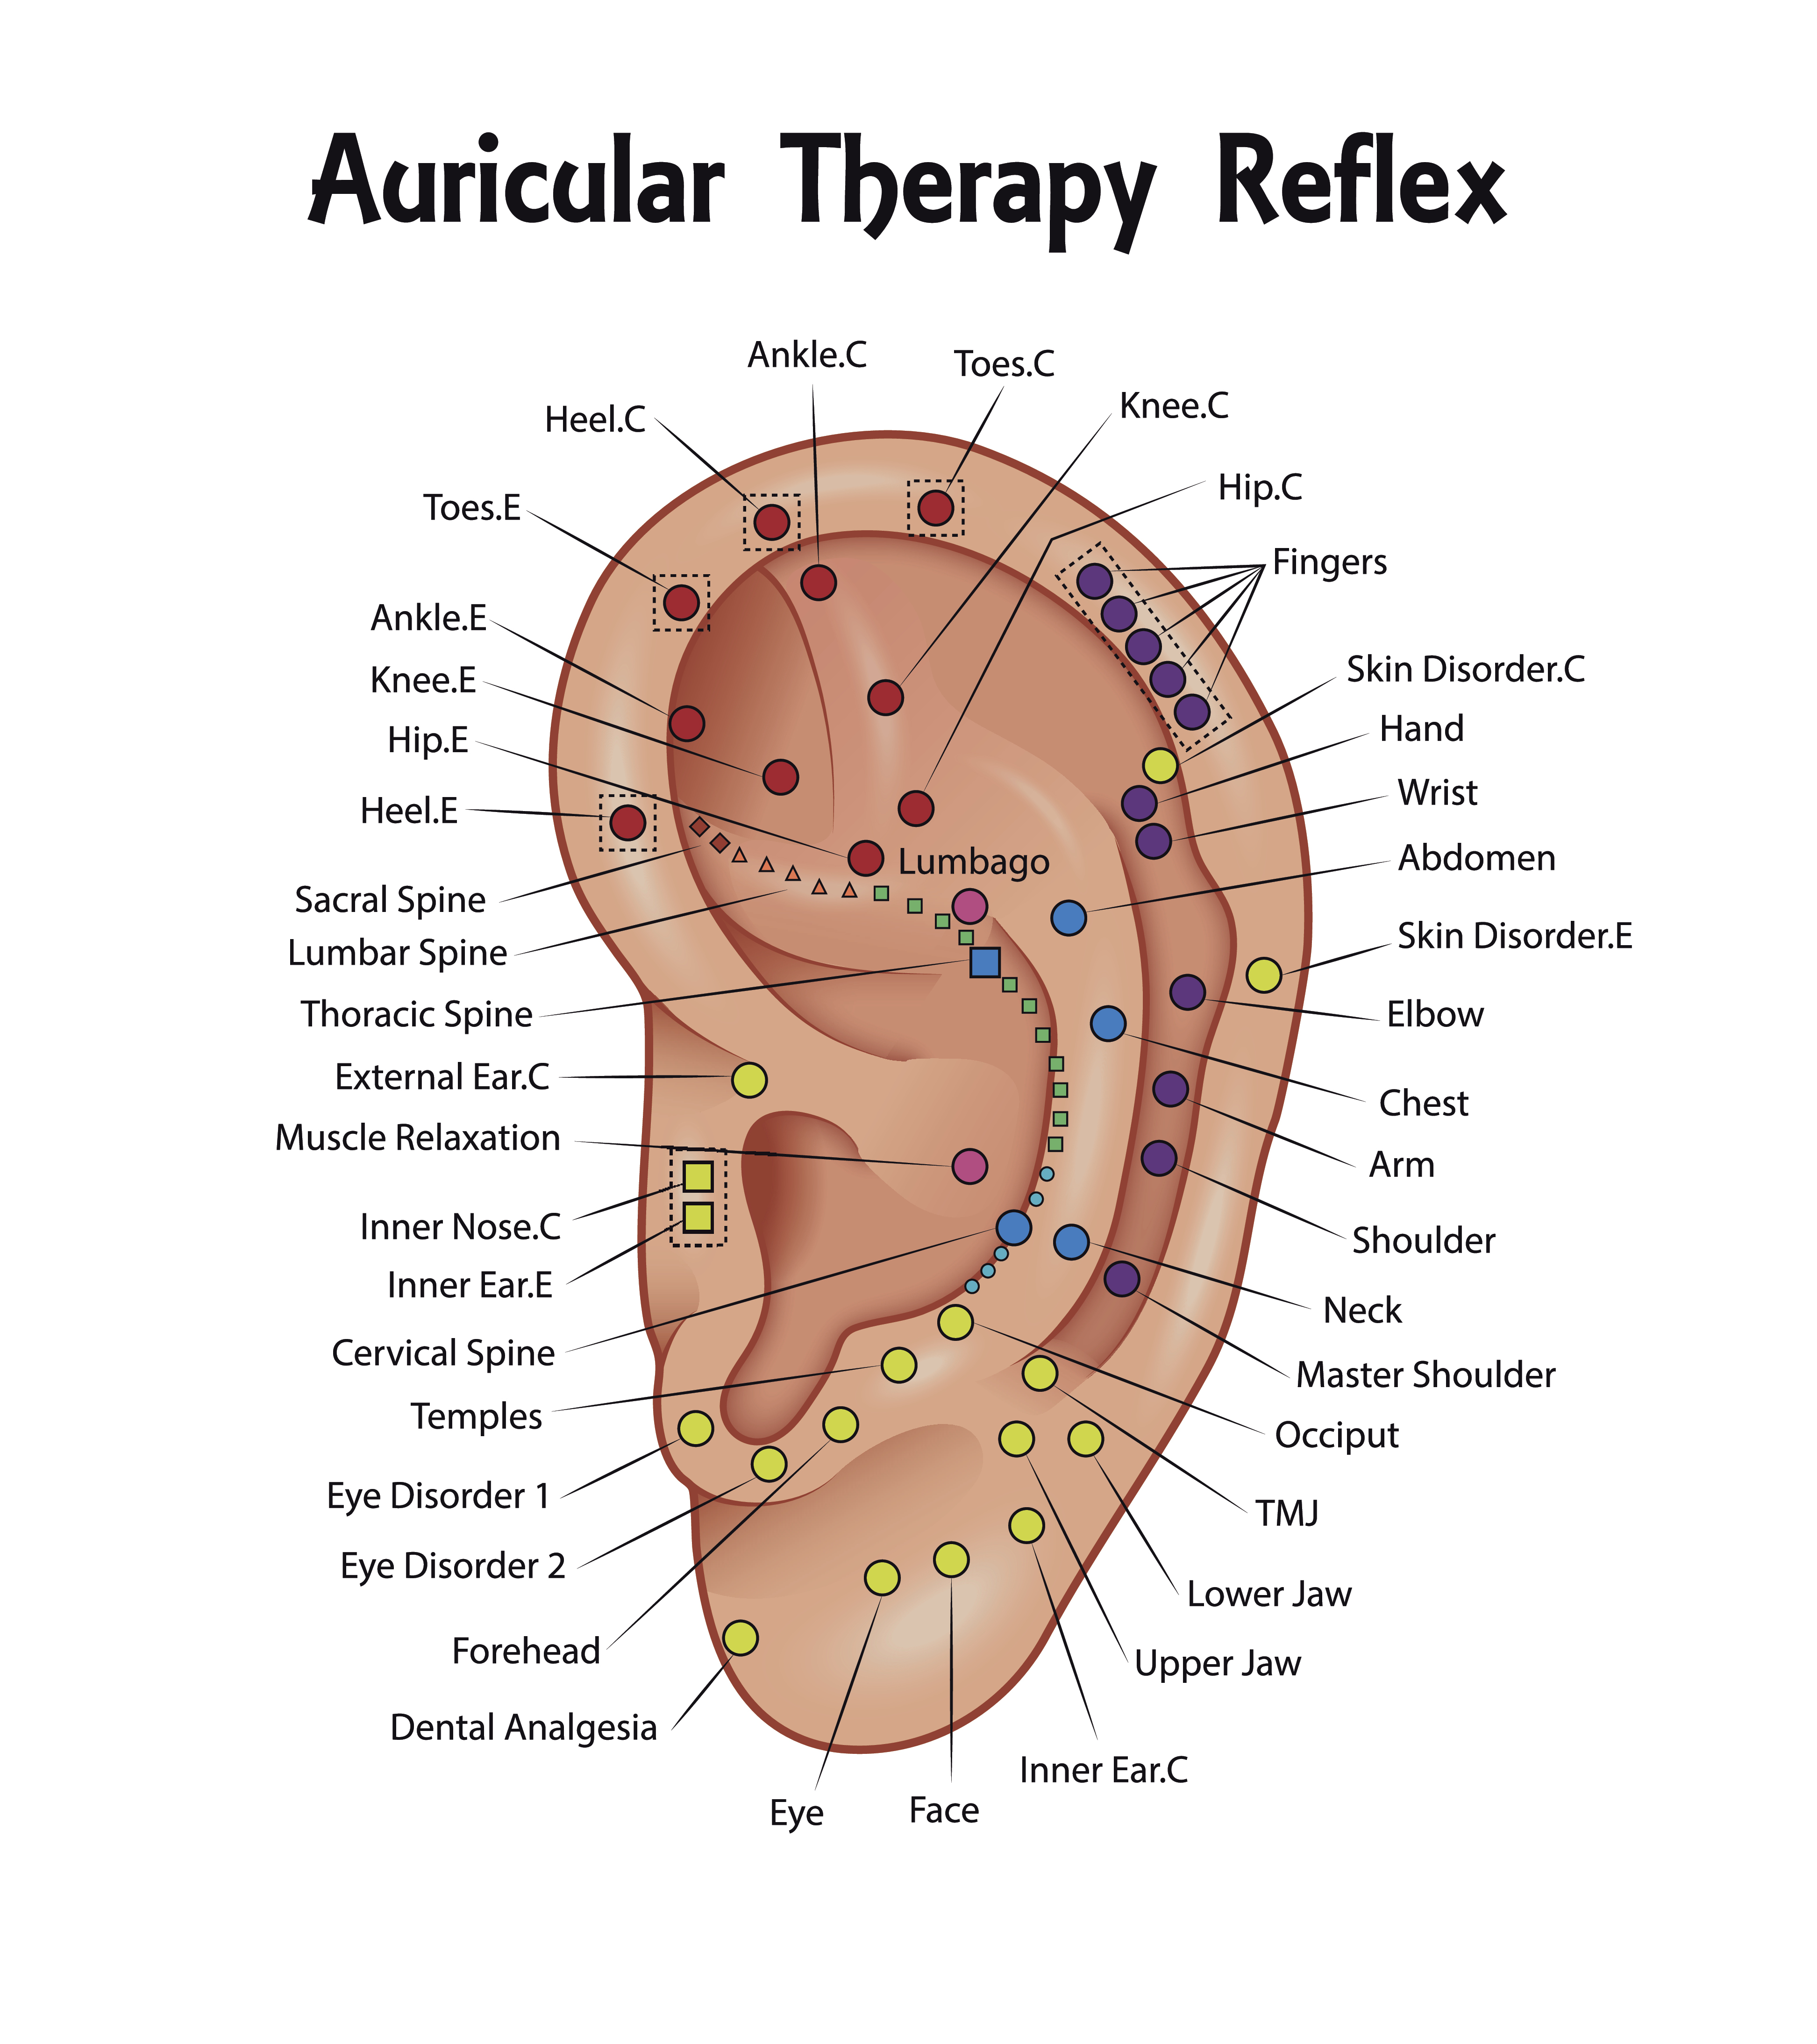 Illustration of a Auricular Therapy Reflex Chart